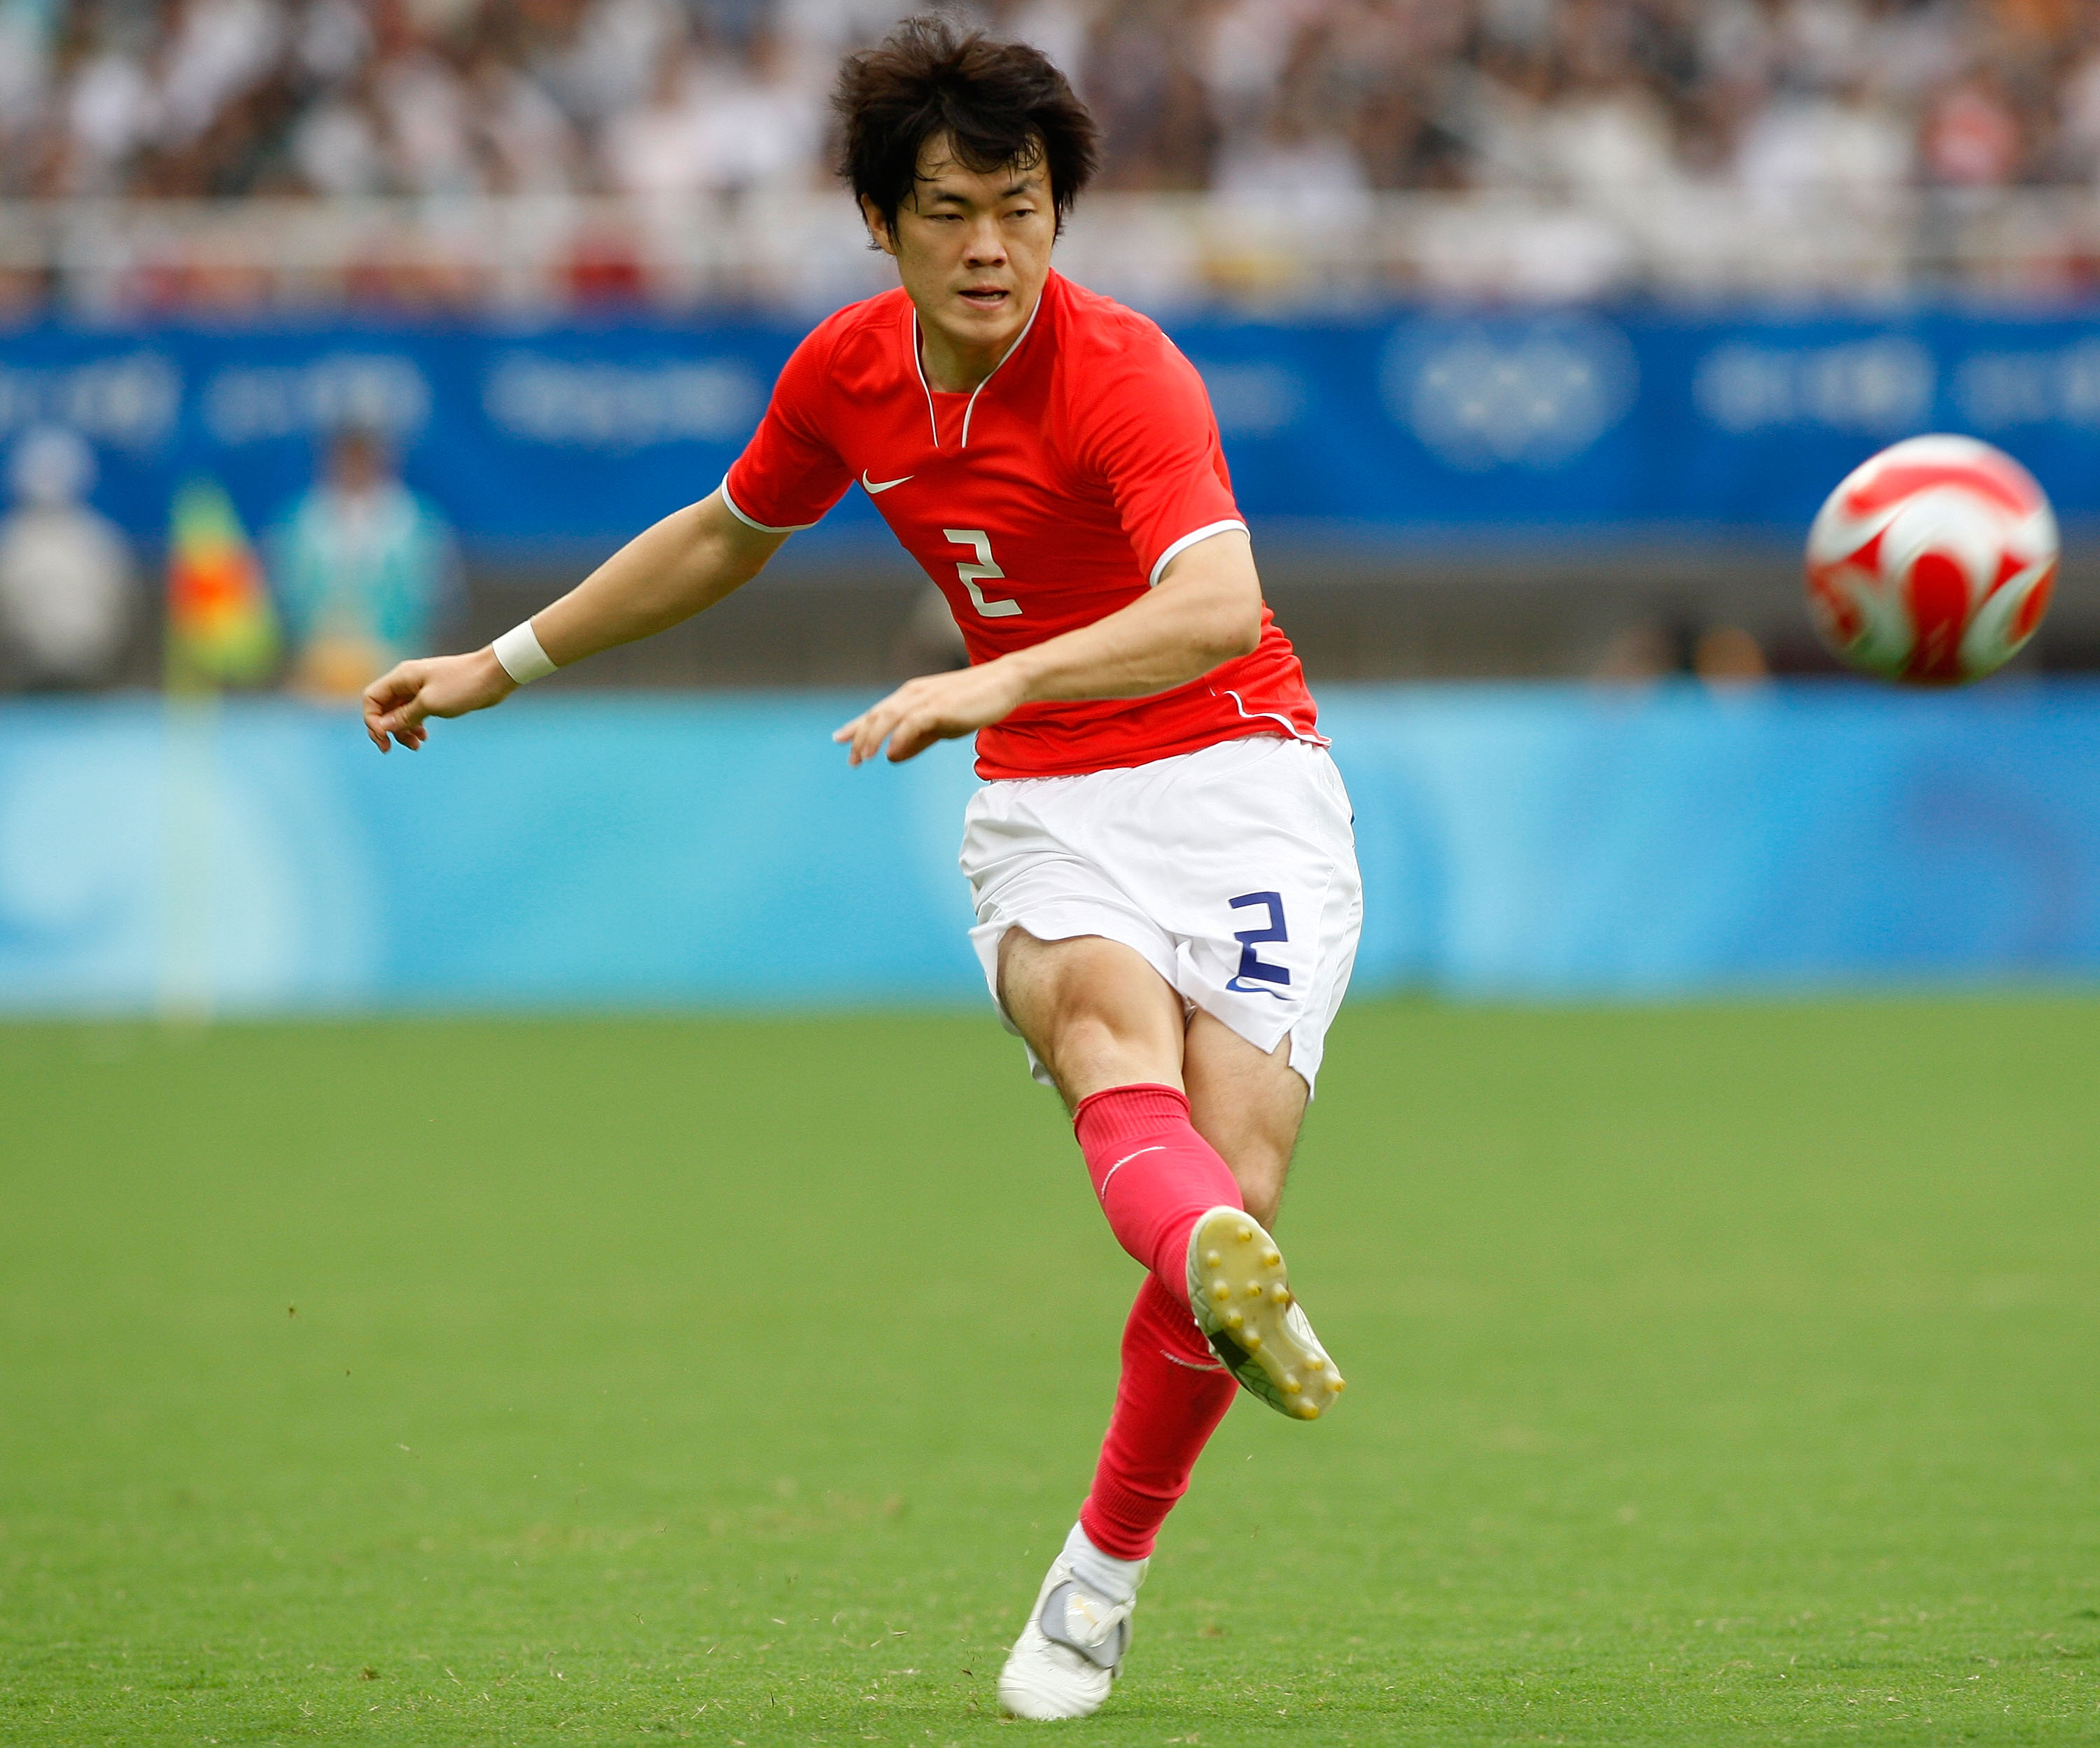 SHANGHAI, CHINA - AUGUST 13:  Shin Kwang Hoon of South Korea passes the ball during the Men's Group D match between South Korea and Honduras at Shanghai Stadium on Day 5 of the Beijing 2008 Olympic Games on August 13, 2008 in Shanghai, China.  (Photo by N